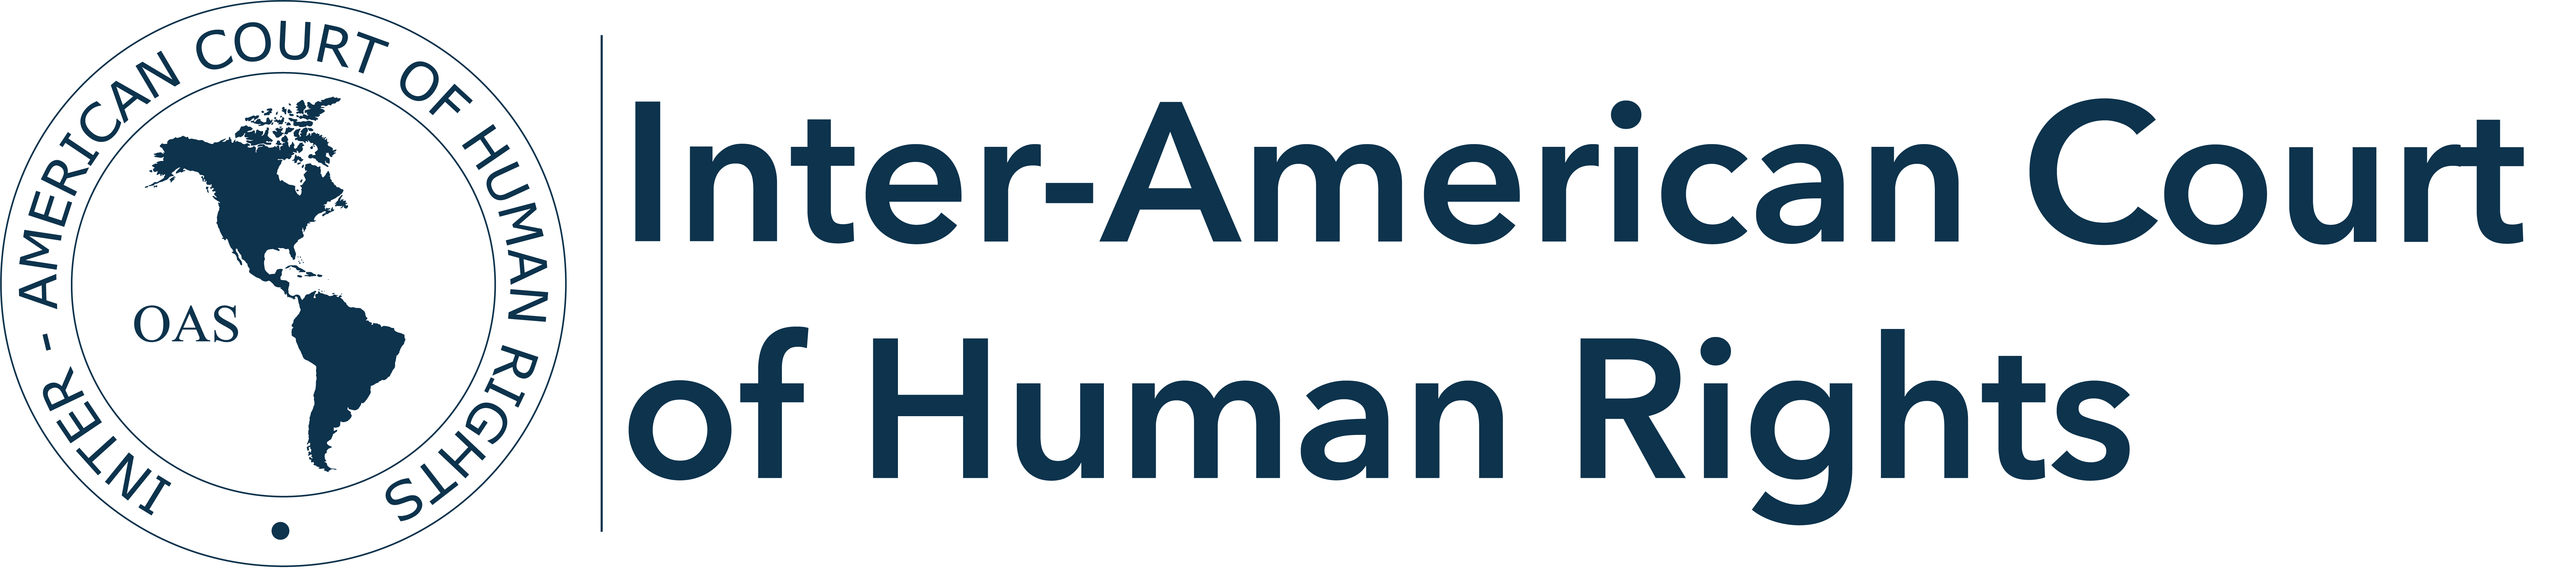 Inter-American Court of Human Rights - Learn about the Monitoring  Compliance with Judgment